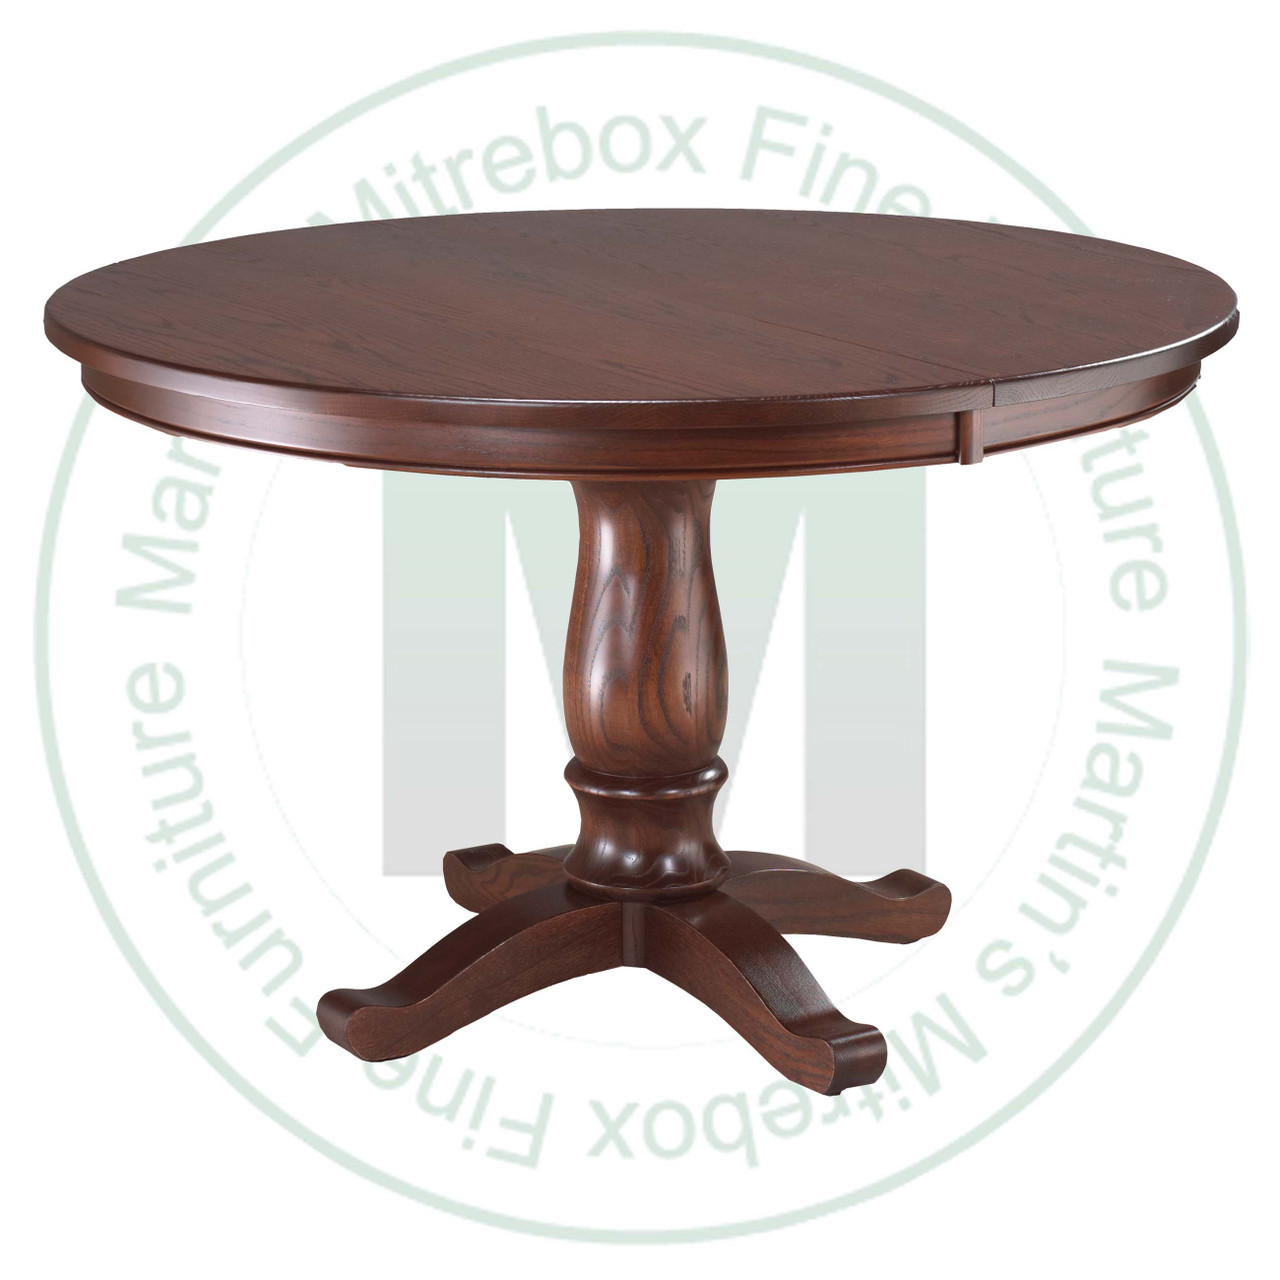 Maple Kimberly Crest Single Pedestal Table 54''D x 54''W x 30''H With 1 - 12'' Leaf Table. Table Has 1'' Thick Top.